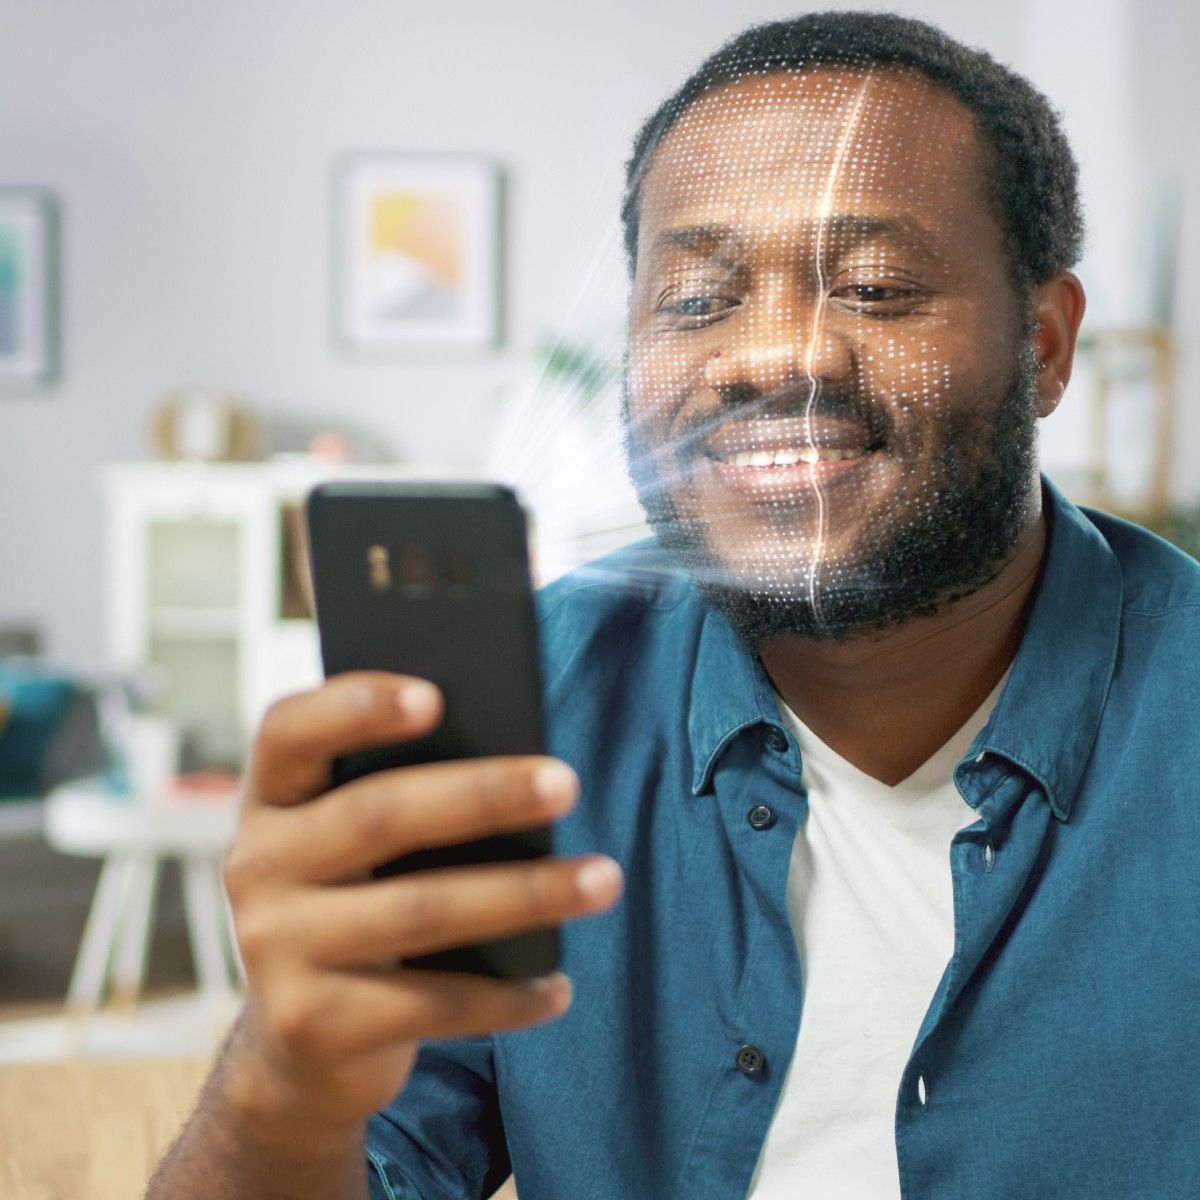 A young bearded Black man holds his cell phone in front of his face with an illustration of the phone's camera scanning his face so he can log into his phone using facial recognition